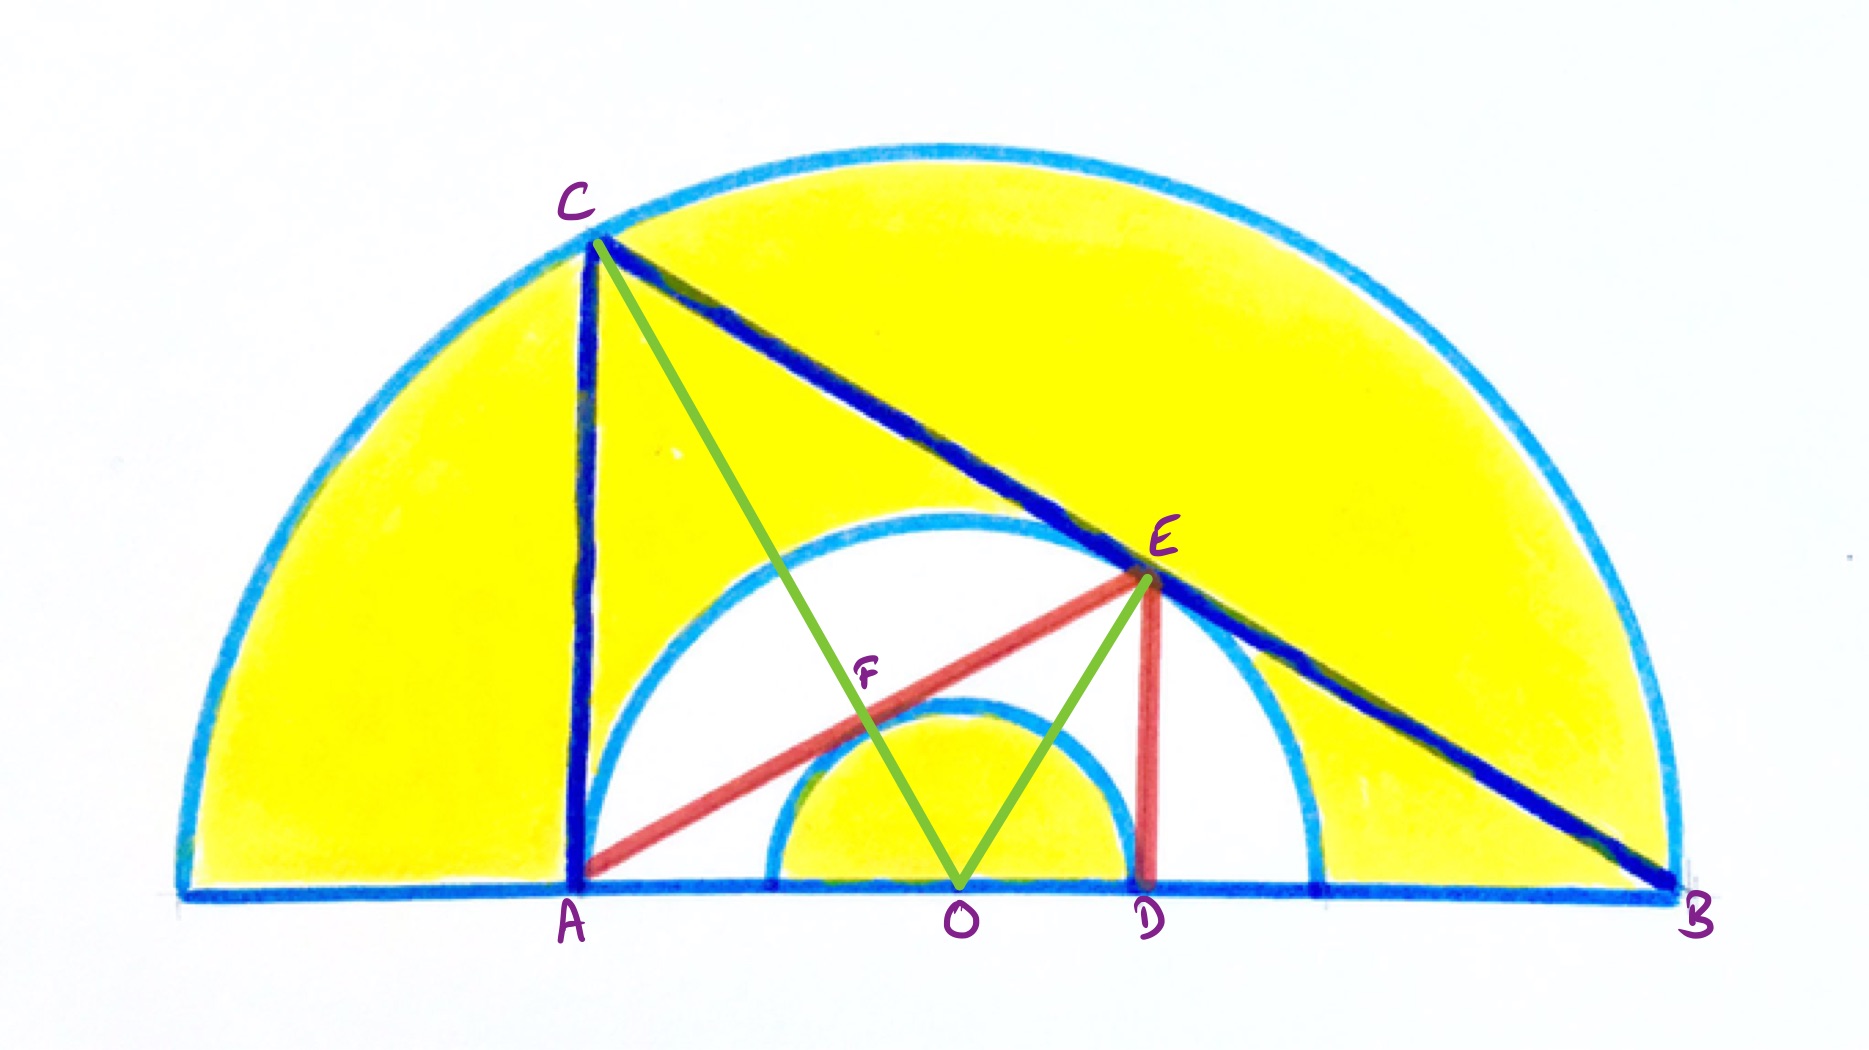 Two triangles and three concentric circles labelled